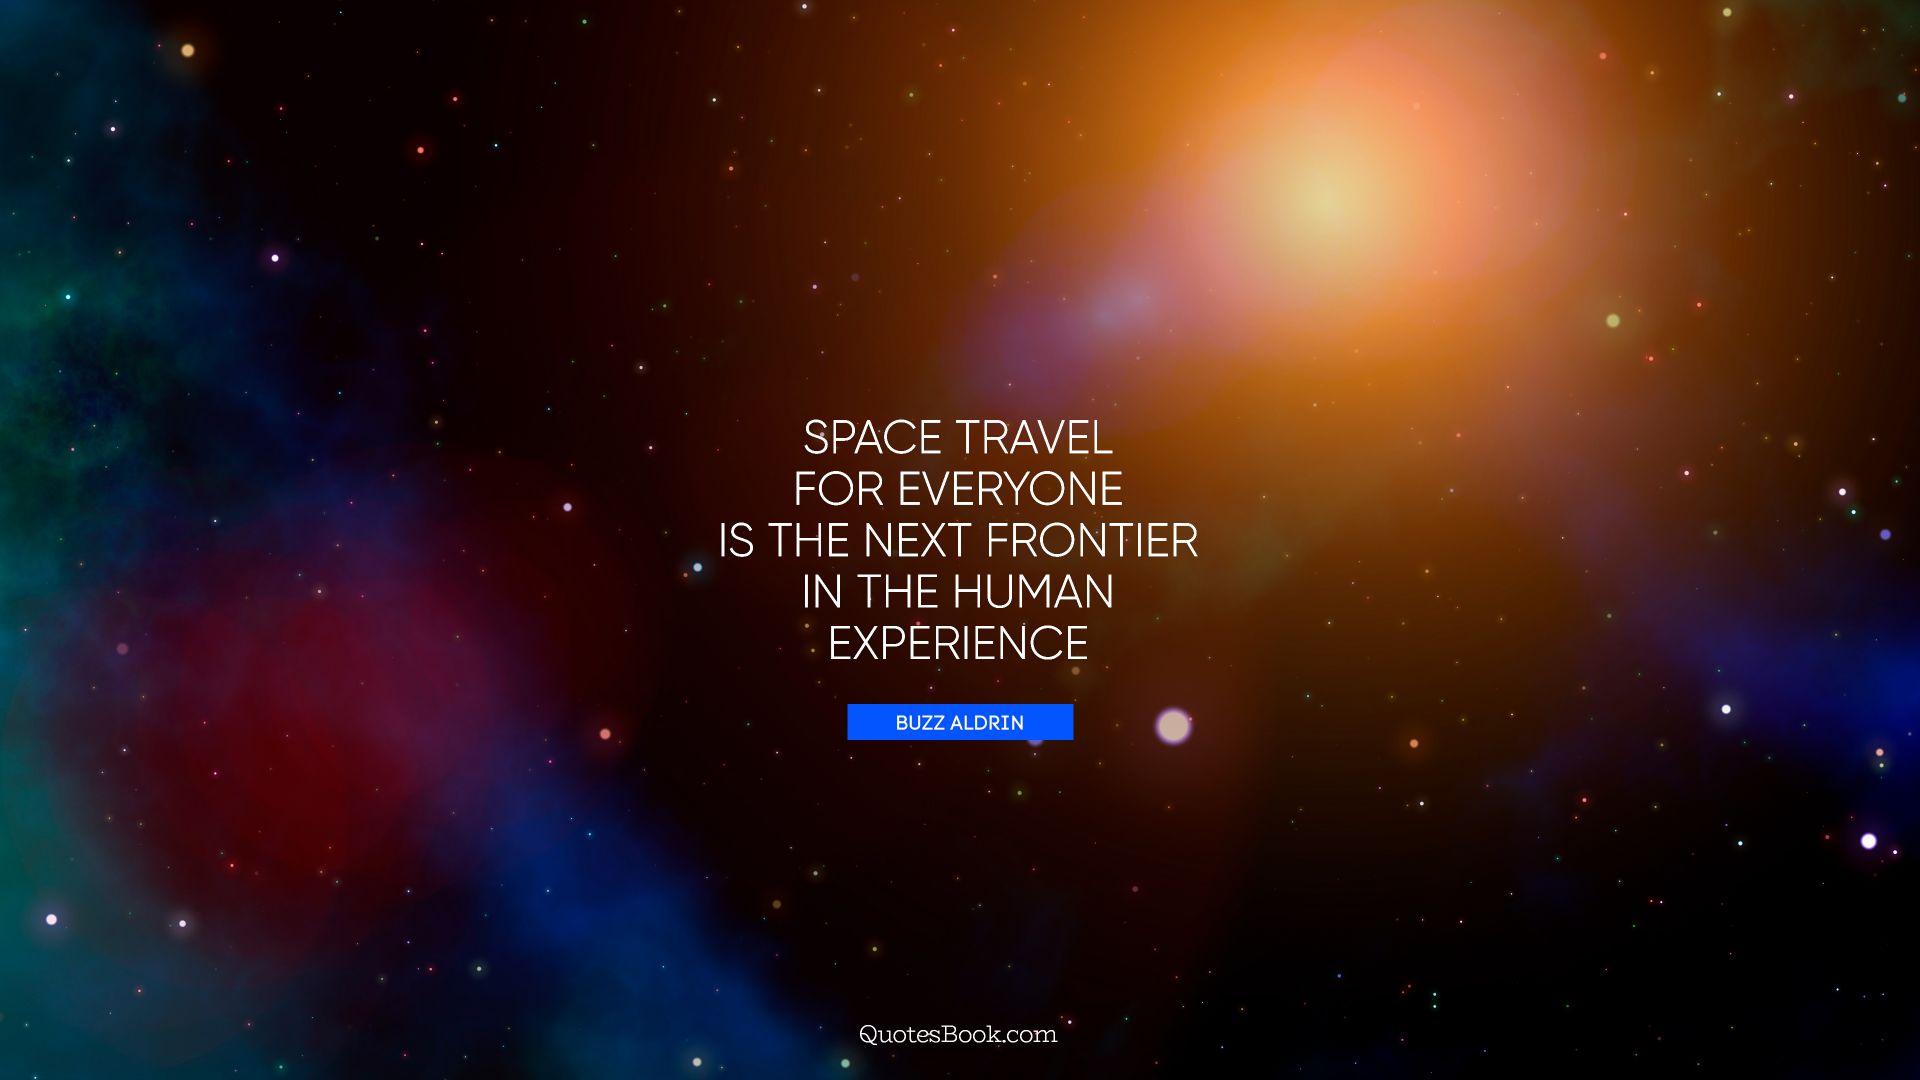 Space travel for everyone is the next frontier in the human experience. - Quote by Buzz Aldrin